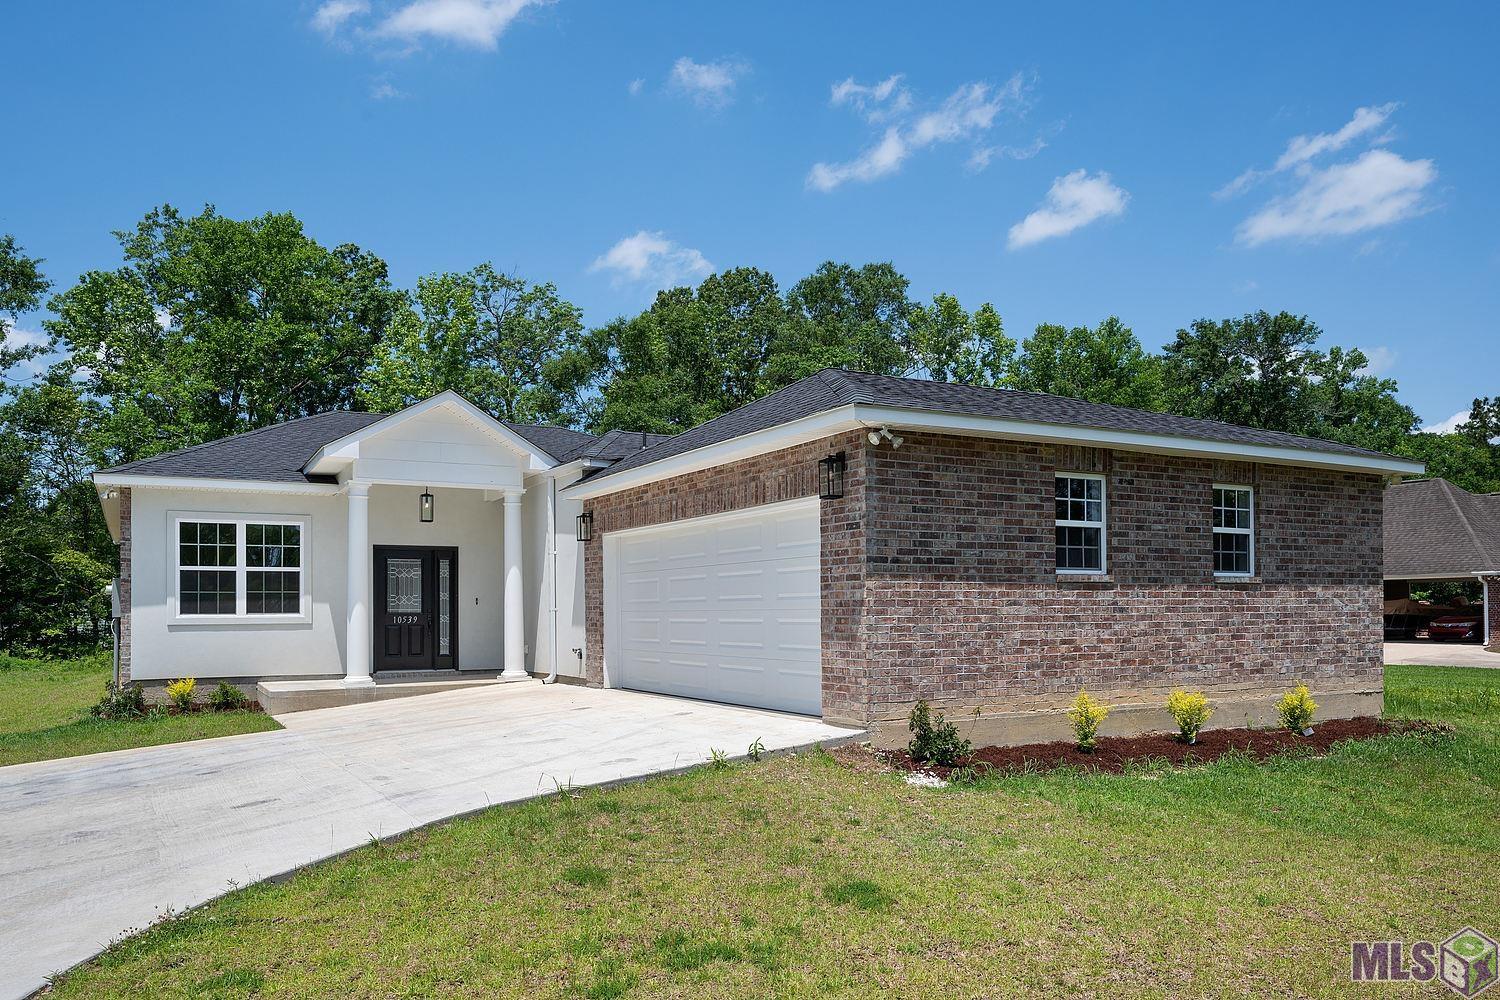 This 3 bedroom, 2.5 bath home in the Northwoods subdivision in Greenwell Springs is absolutely stunning! FLOOD ZONE X- does not require flood insurance. Preferred Lender will contribute up to $1000 credit to buyer! This new construction home features 10’ ceilings with an open floor layout. It was built with a great attention to quality and detail. This house includes vinyl flooring throughout the main areas as well as the master bedroom and porcelain tiles in the bathrooms. Kitchen features white Quartz countertops and kitchen island, white cabinets, and gas cooktop. Master bathroom will feature a double vanity, jetted tub, and a separate walk-in shower. Central air and heating, which includes gas heating. The spacious living area is perfect for entertaining guests, an office for working from home, and a formal dining room for all family meals. A large 2 car garage will lead you to a mud room great for extra storage. This home has so more to offer. Don't miss your chance to see for yourself!